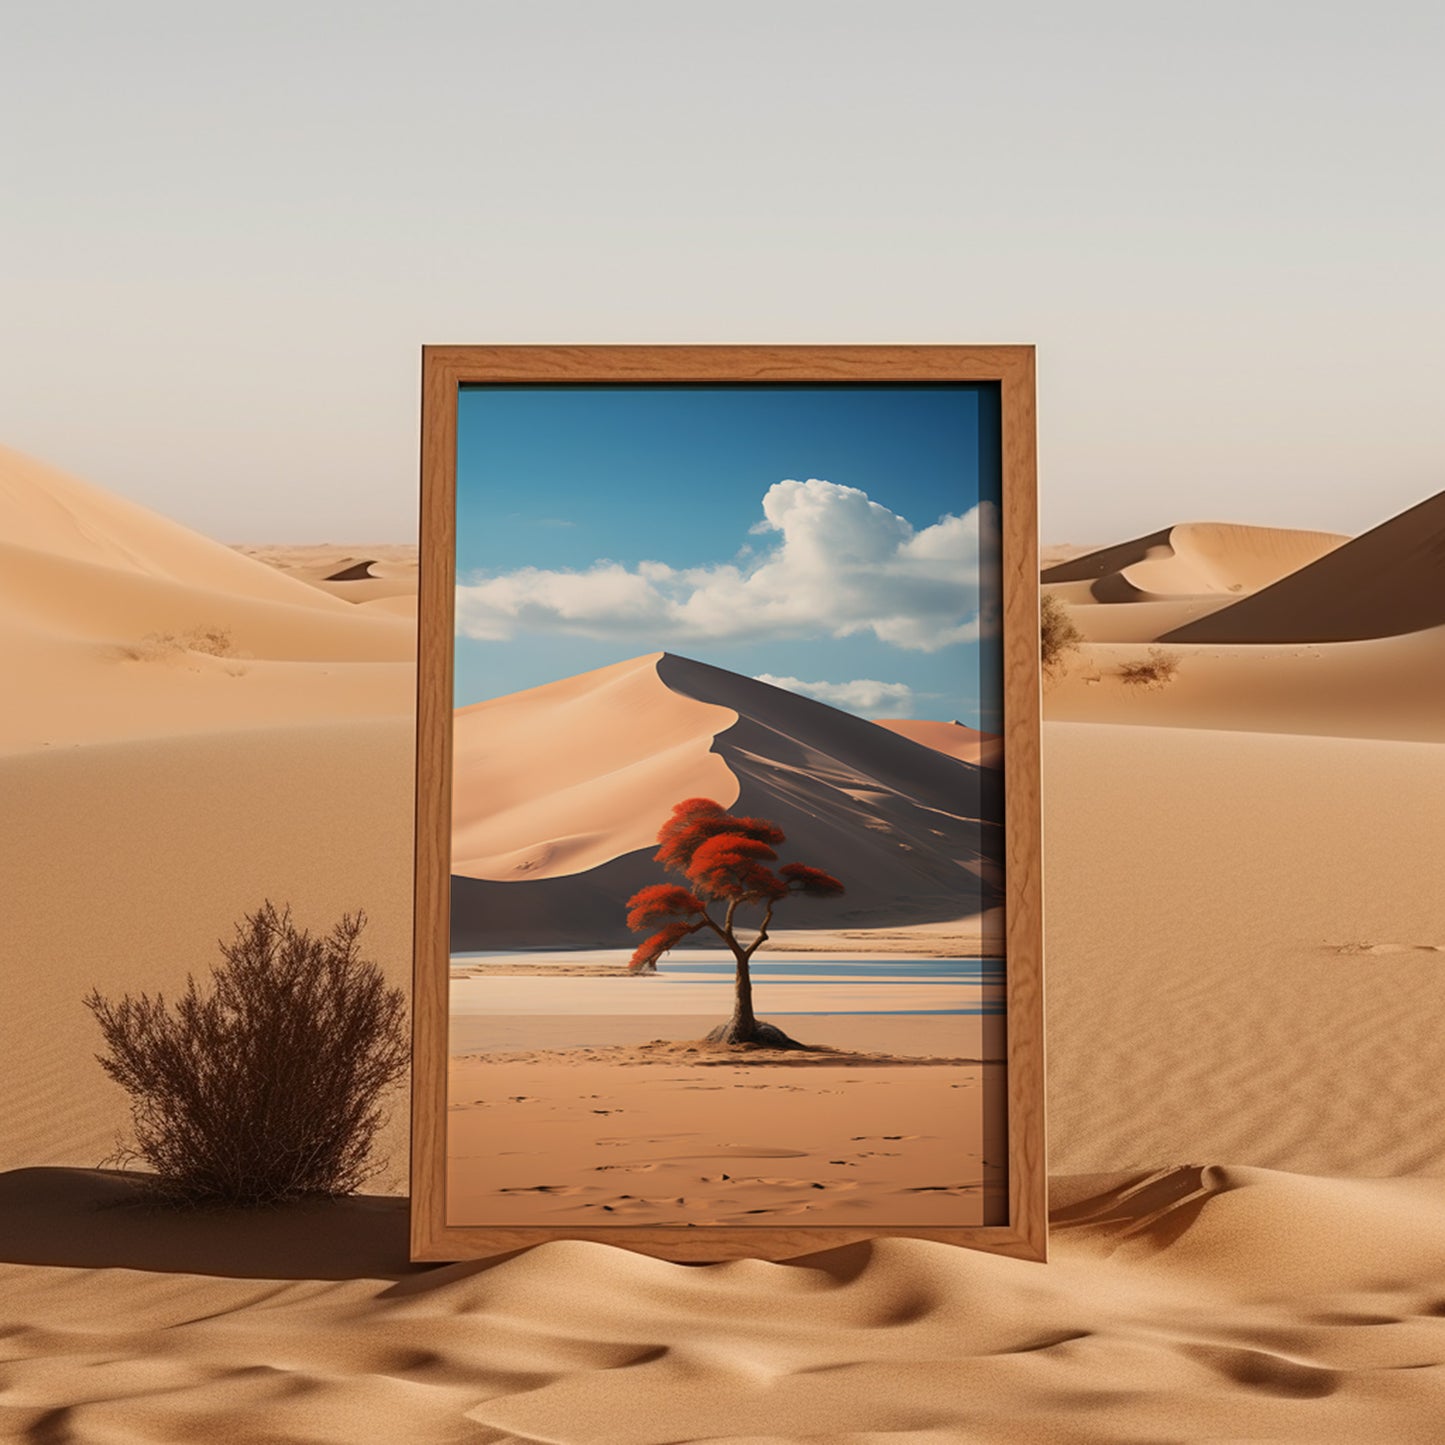 A framed picture of a tree in a desert displayed in the sand dunes under a blue sky.